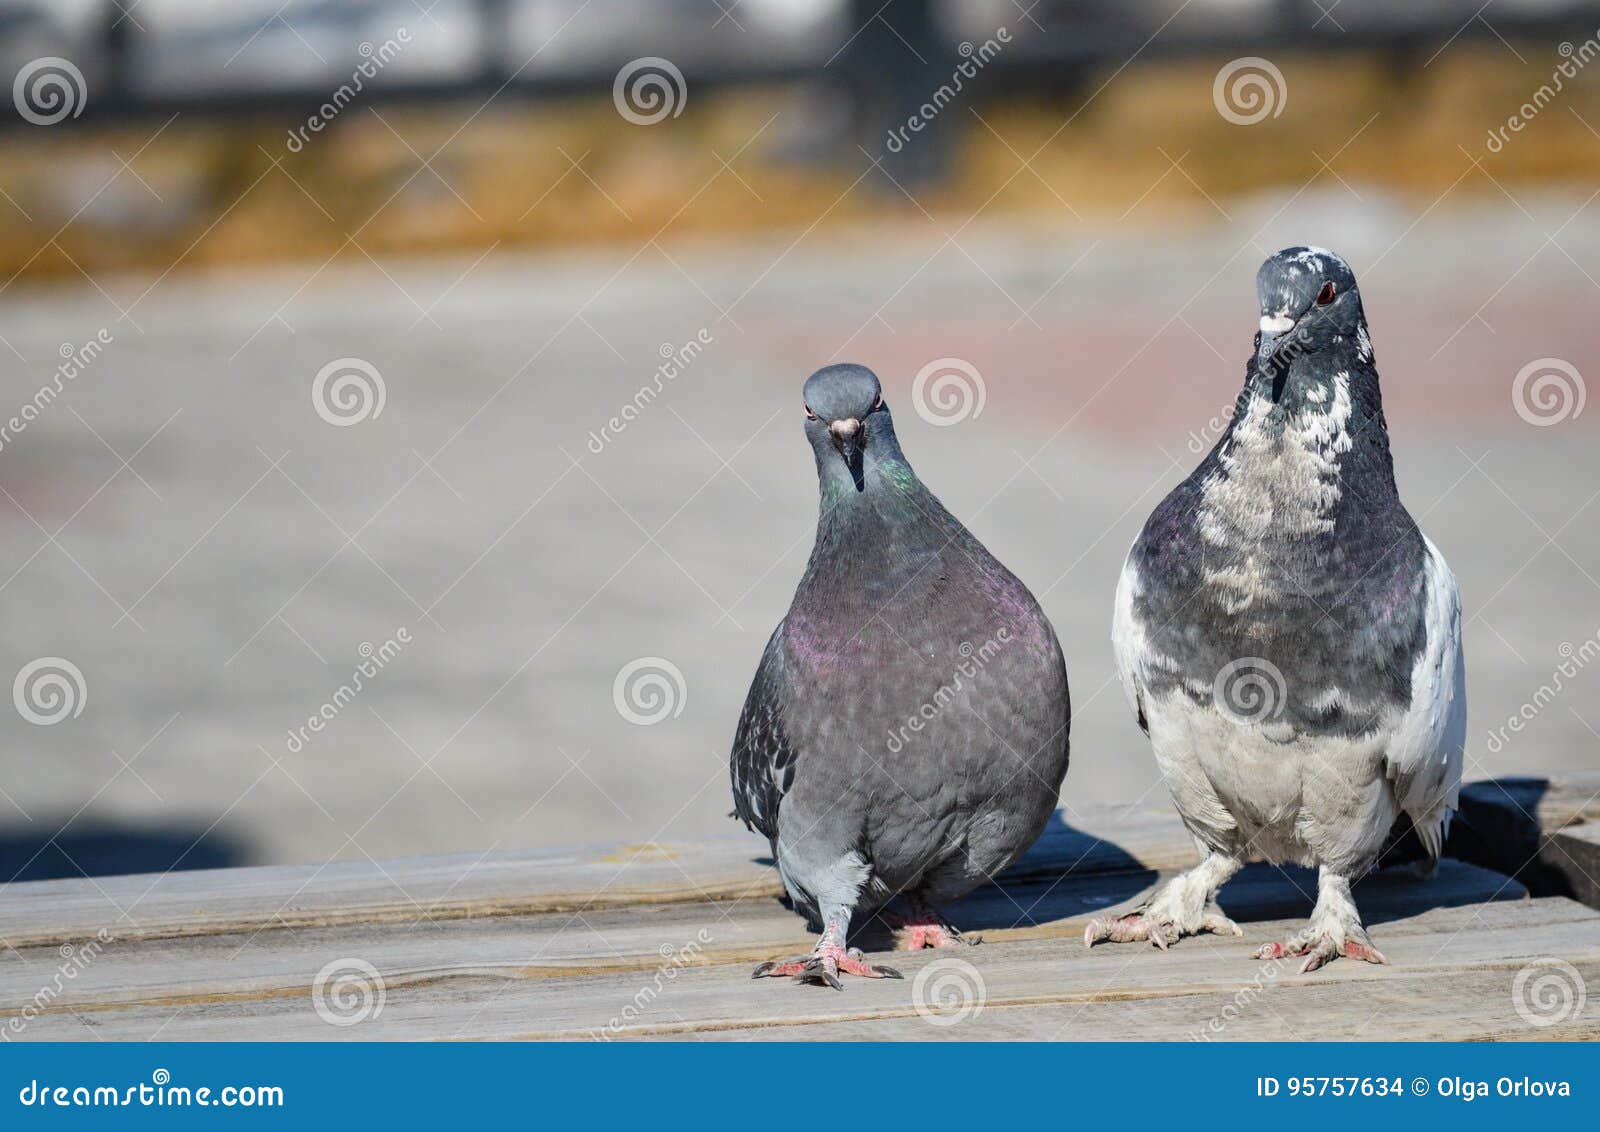 Funny pigeon pair stock photo. Image of love, pigeon - 95757634